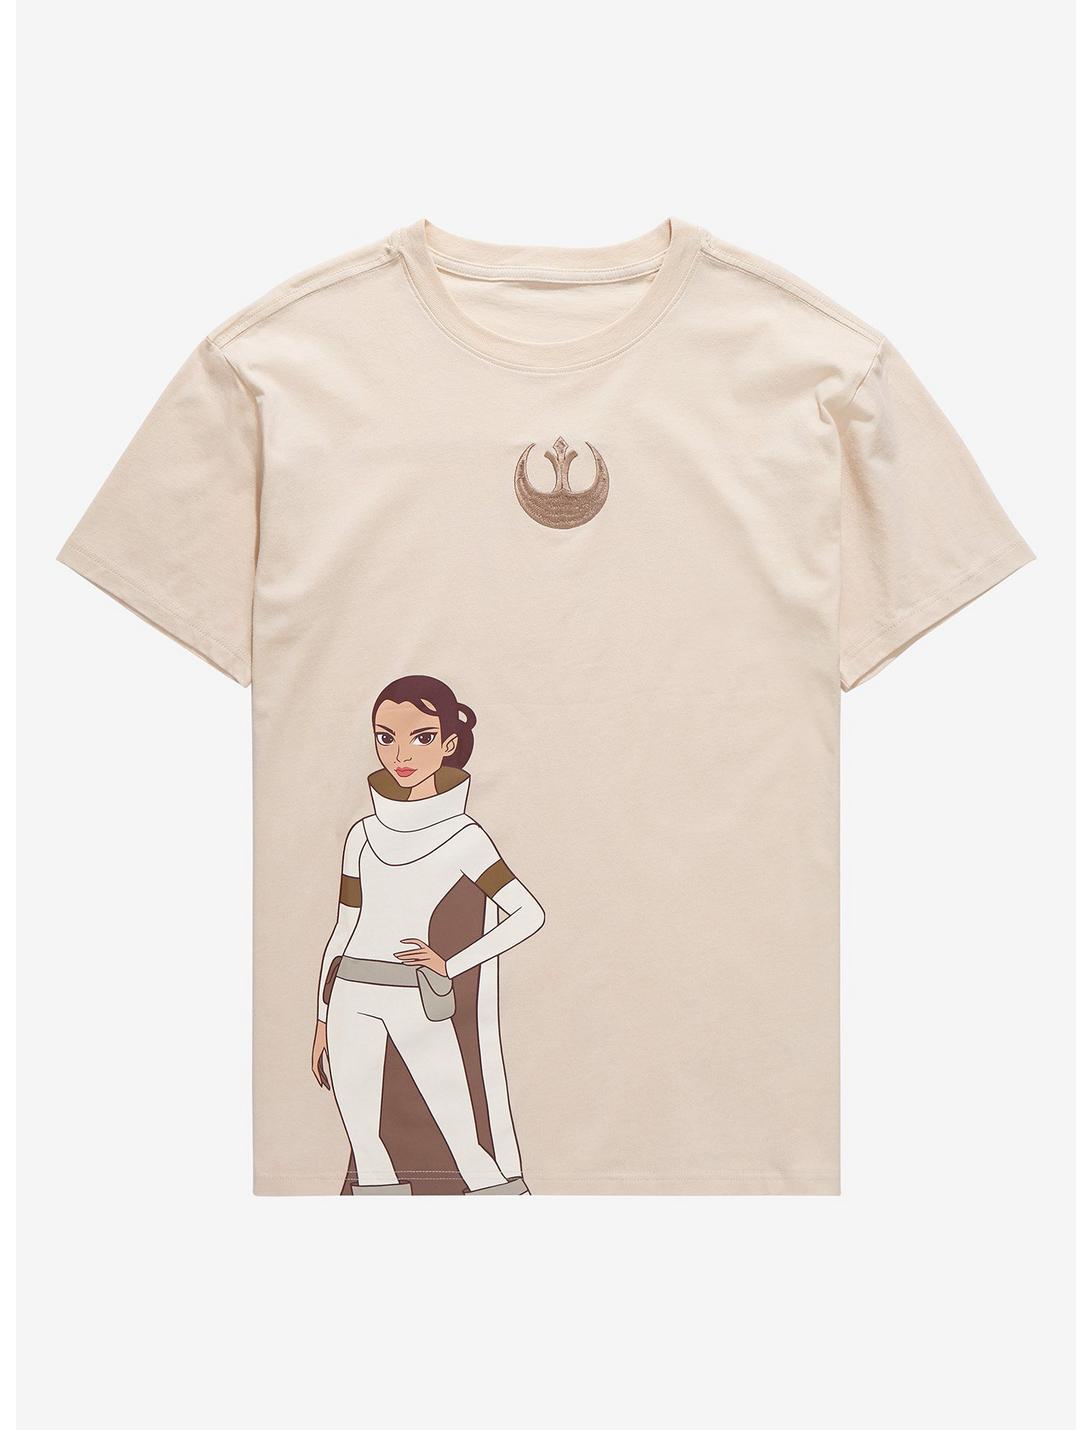 Star Wars Padmé Amidala Embroidered T-Shirt - BoxLunch Exclusive, CREAM, hi-res